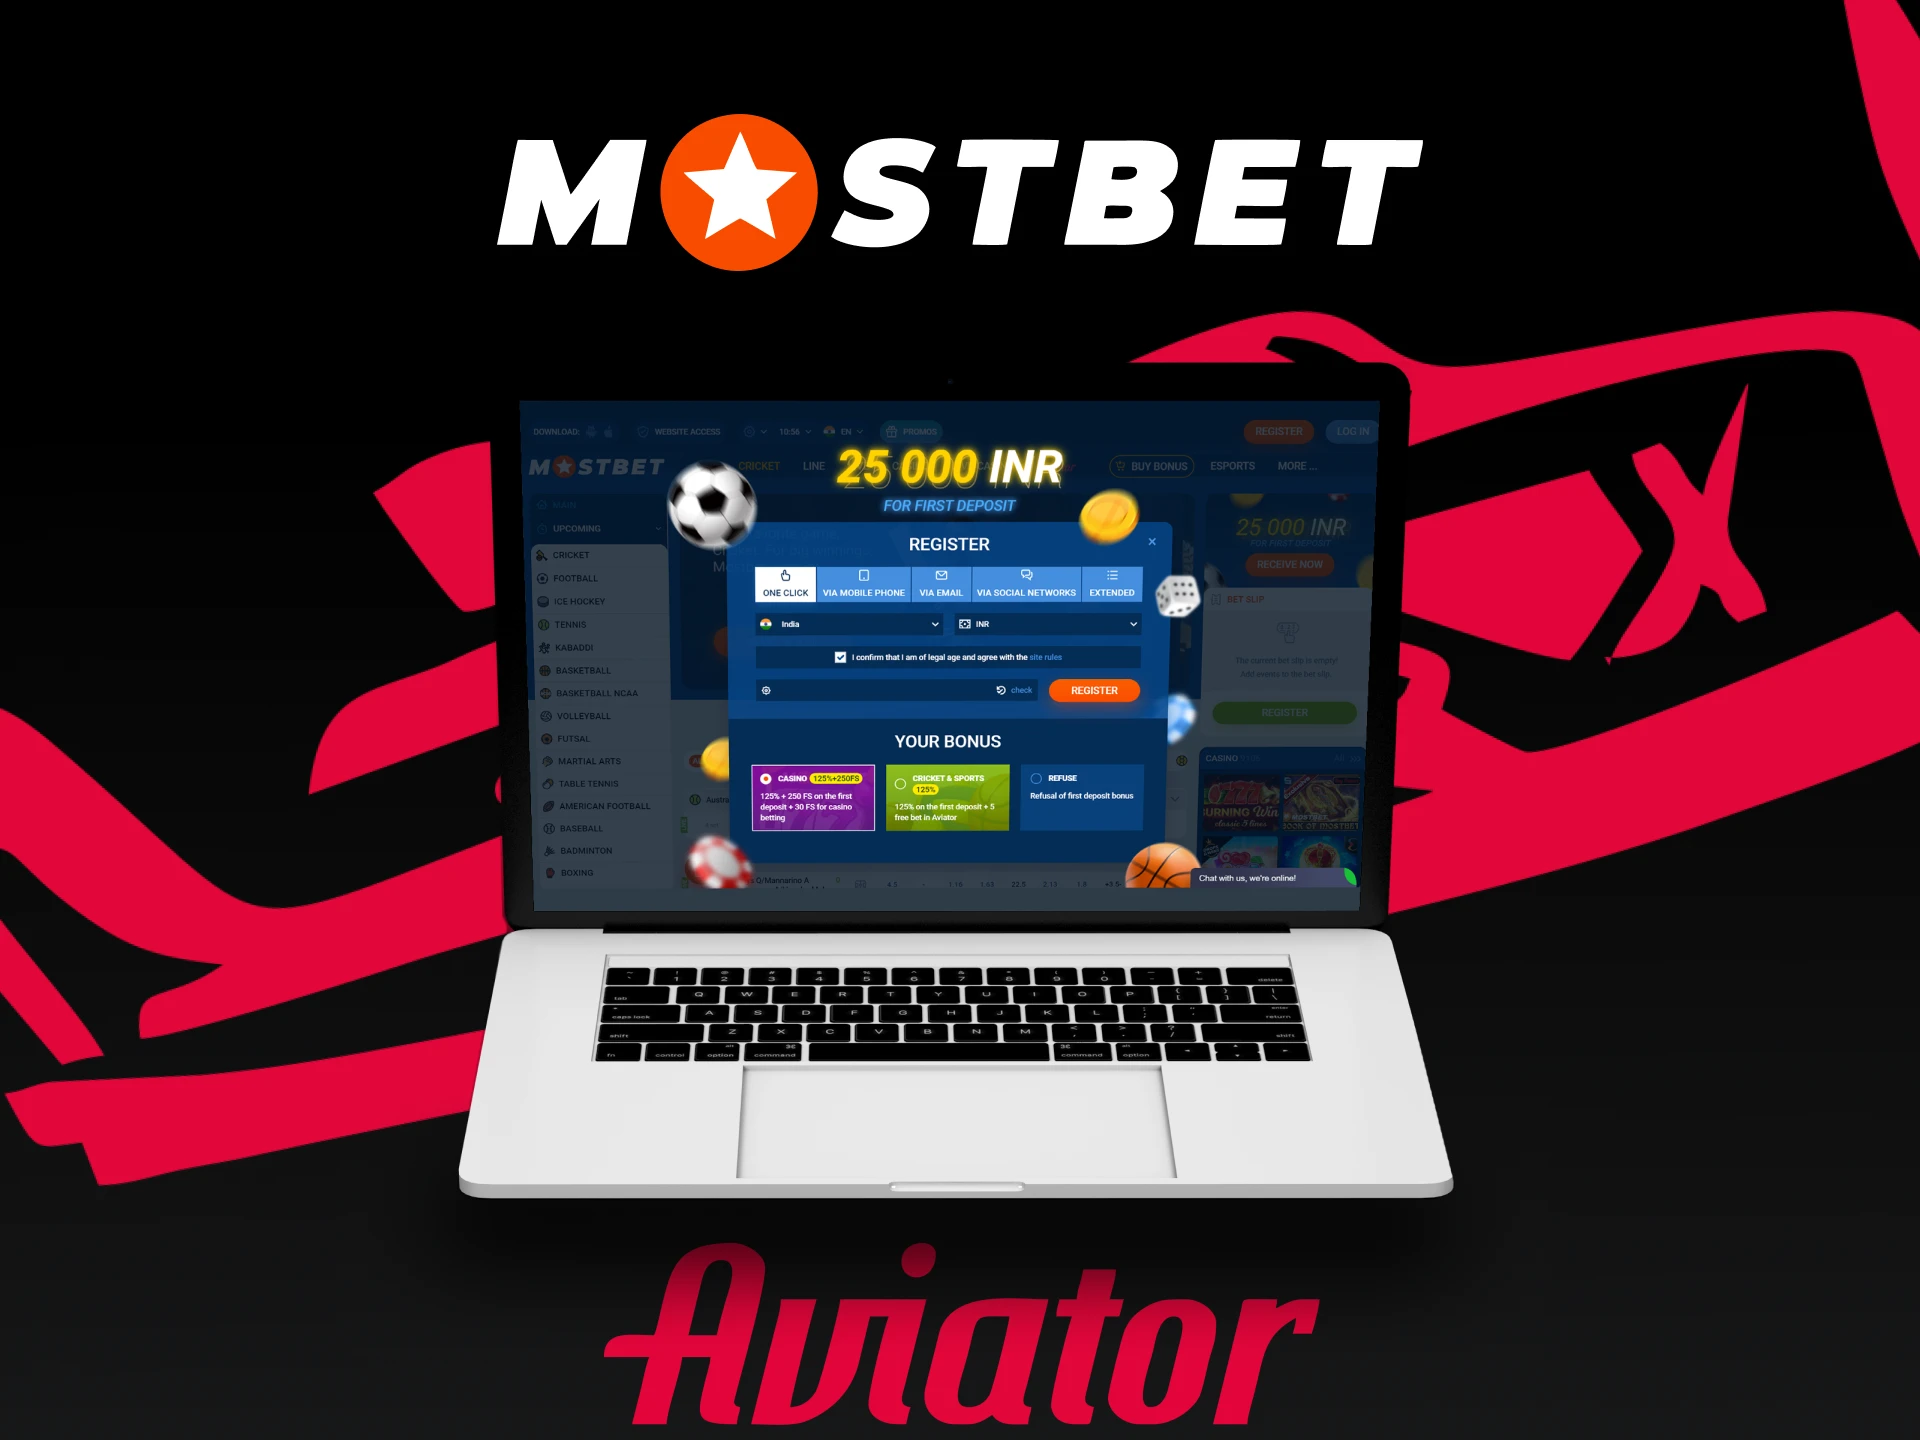 Use the promo code from Mostbet to play Aviator.